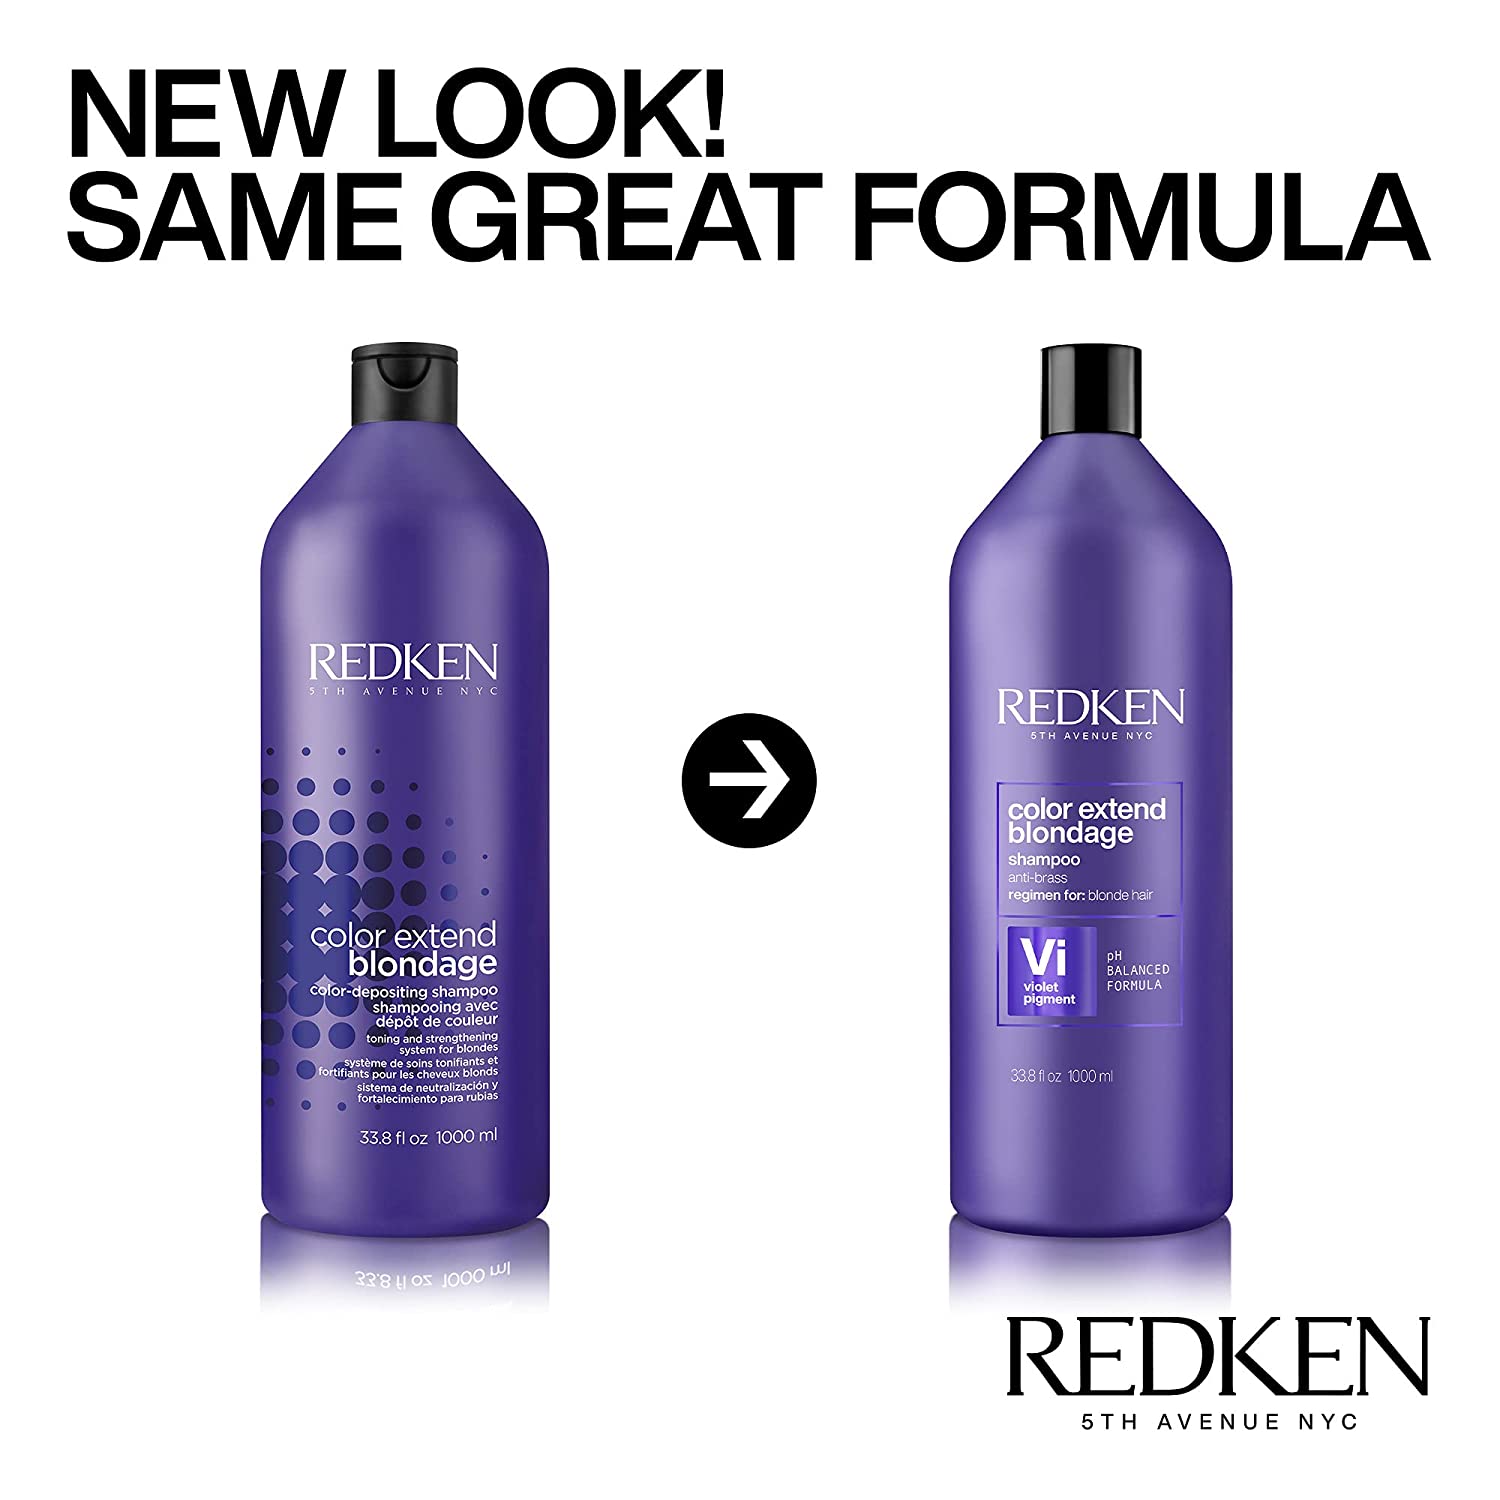 Redken Color Extend Blondage Shampoo 33.8oz / - Redken Hair for Removing Brassiness, Fade Protection and Repair Blonde Hair